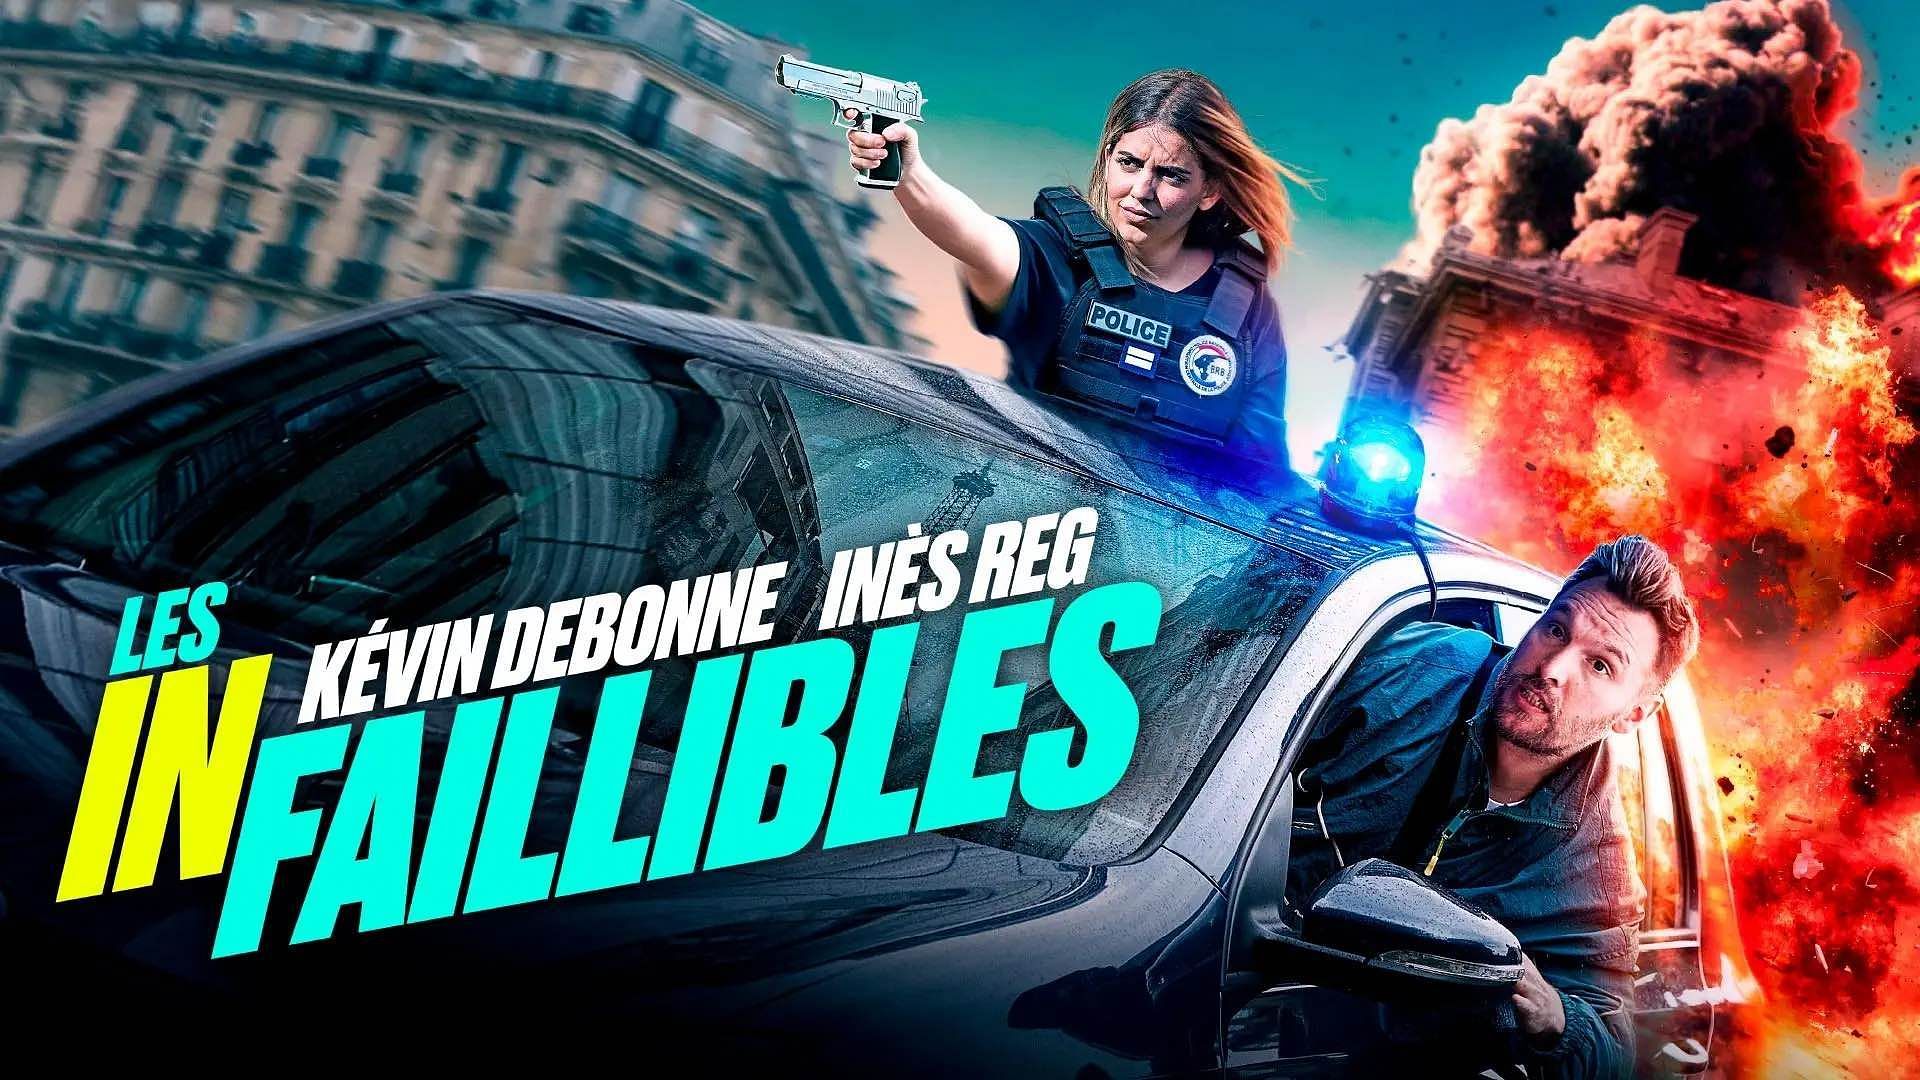 The Infallibles streaming on Prime Video now (Image via Prime Video)